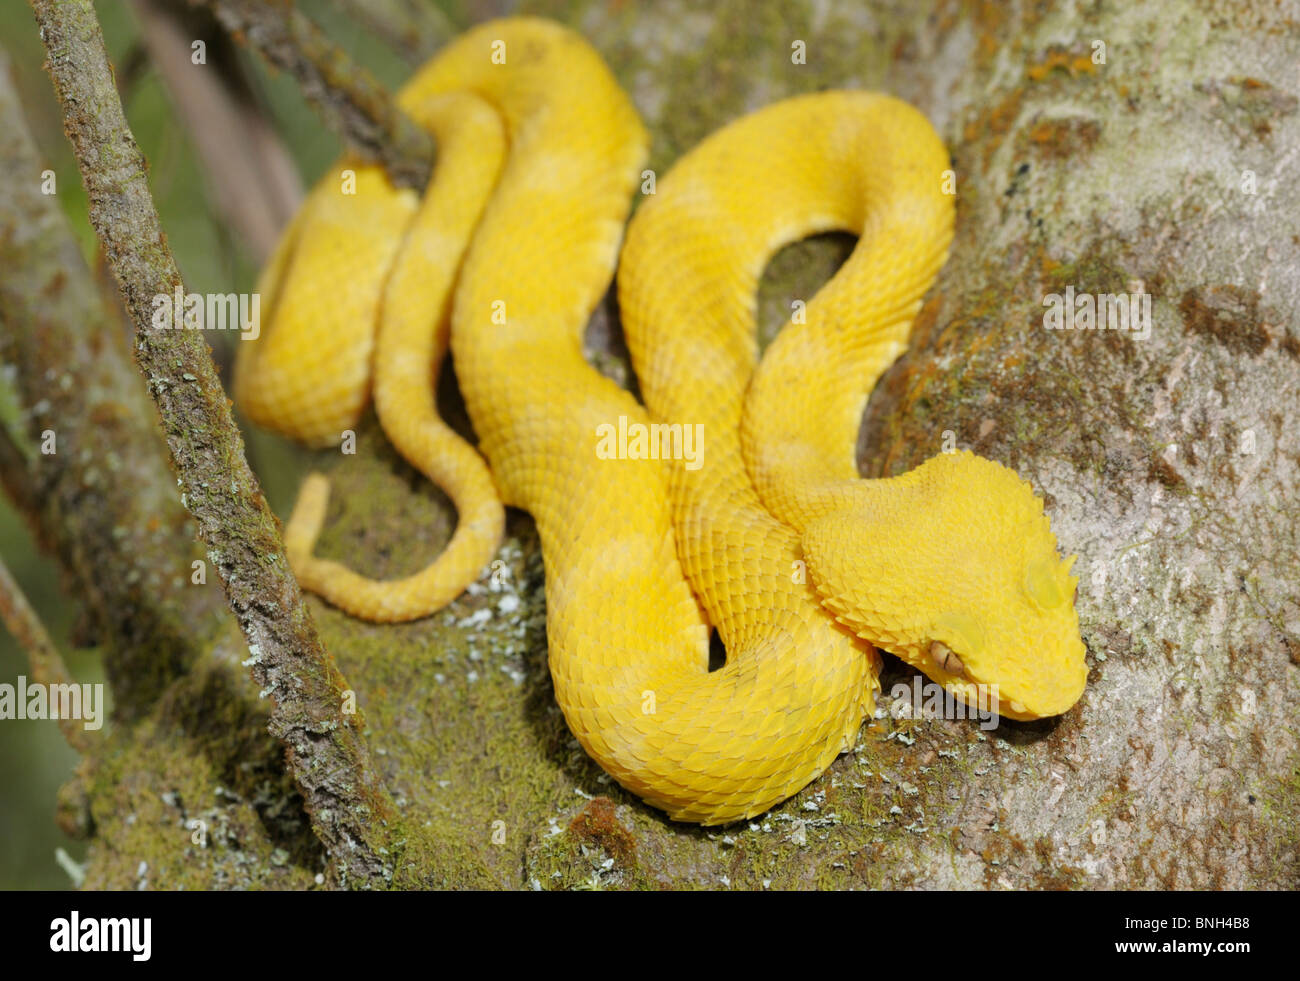 Bothriechis schlegelii cils, Viper, parc national Arenal, Costa Rica Banque D'Images